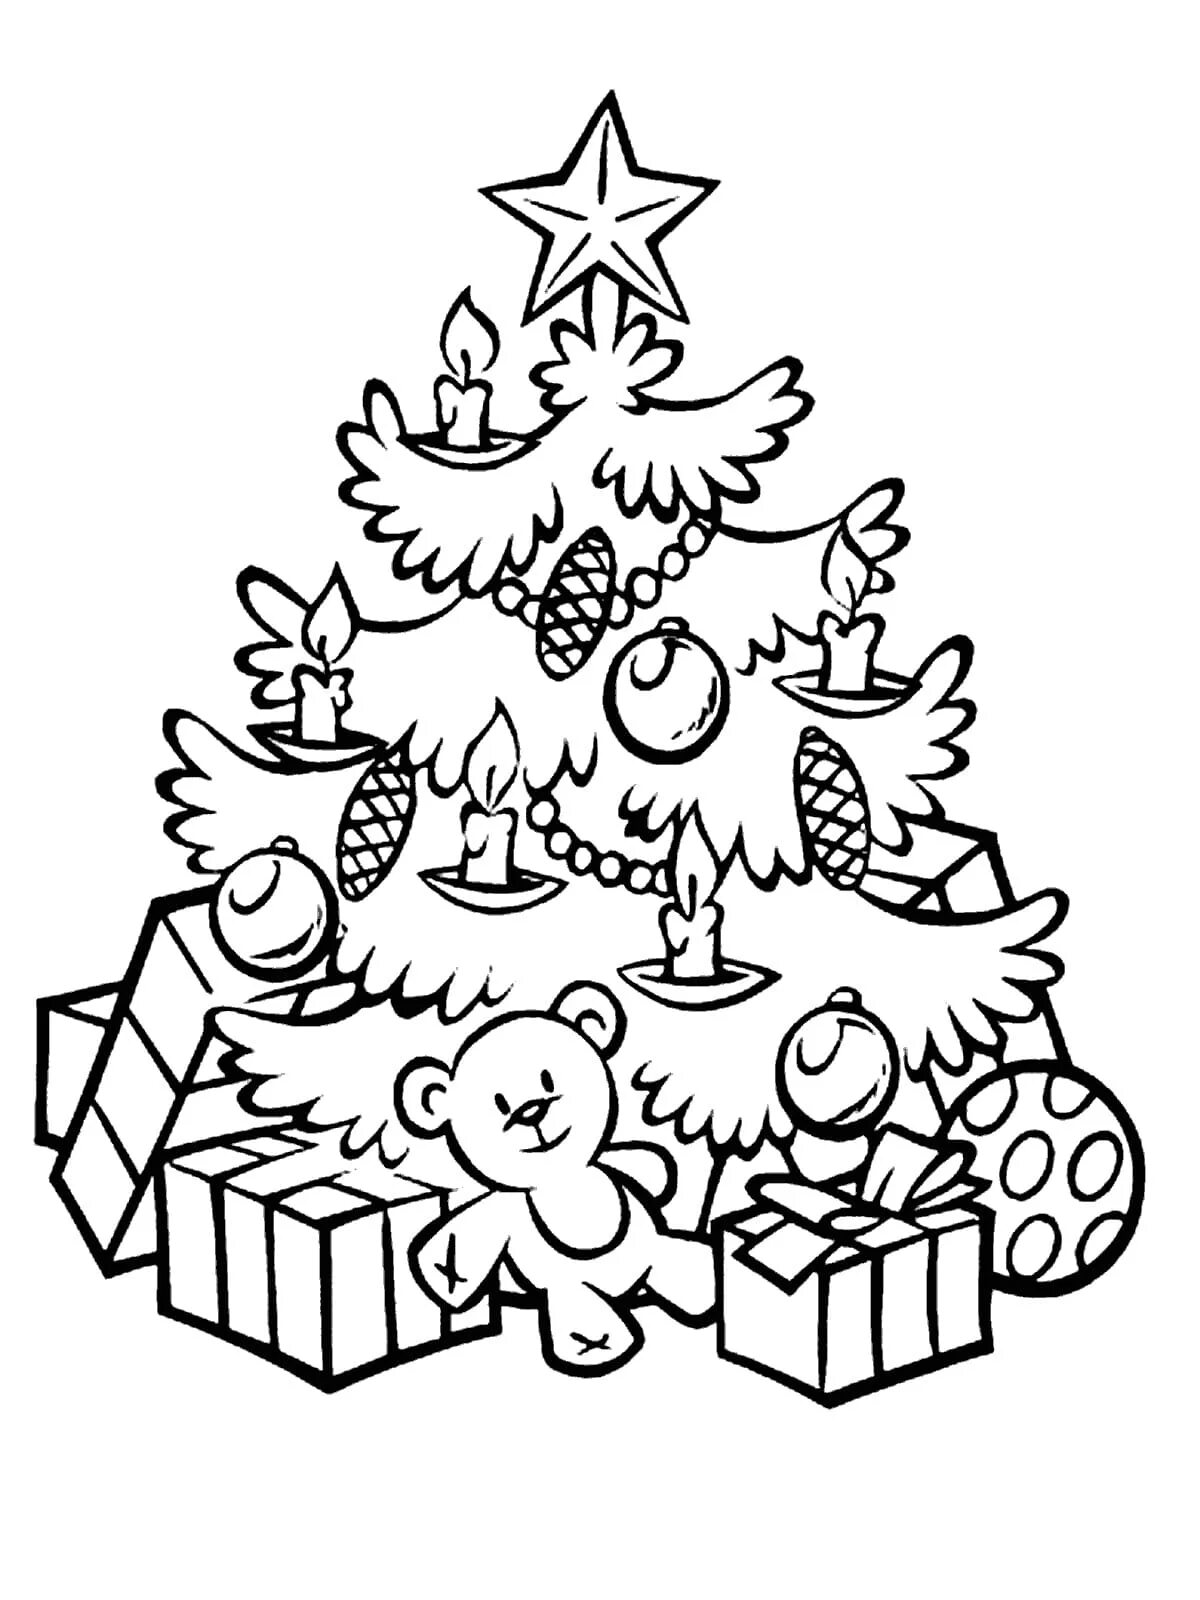 Living tree with toys